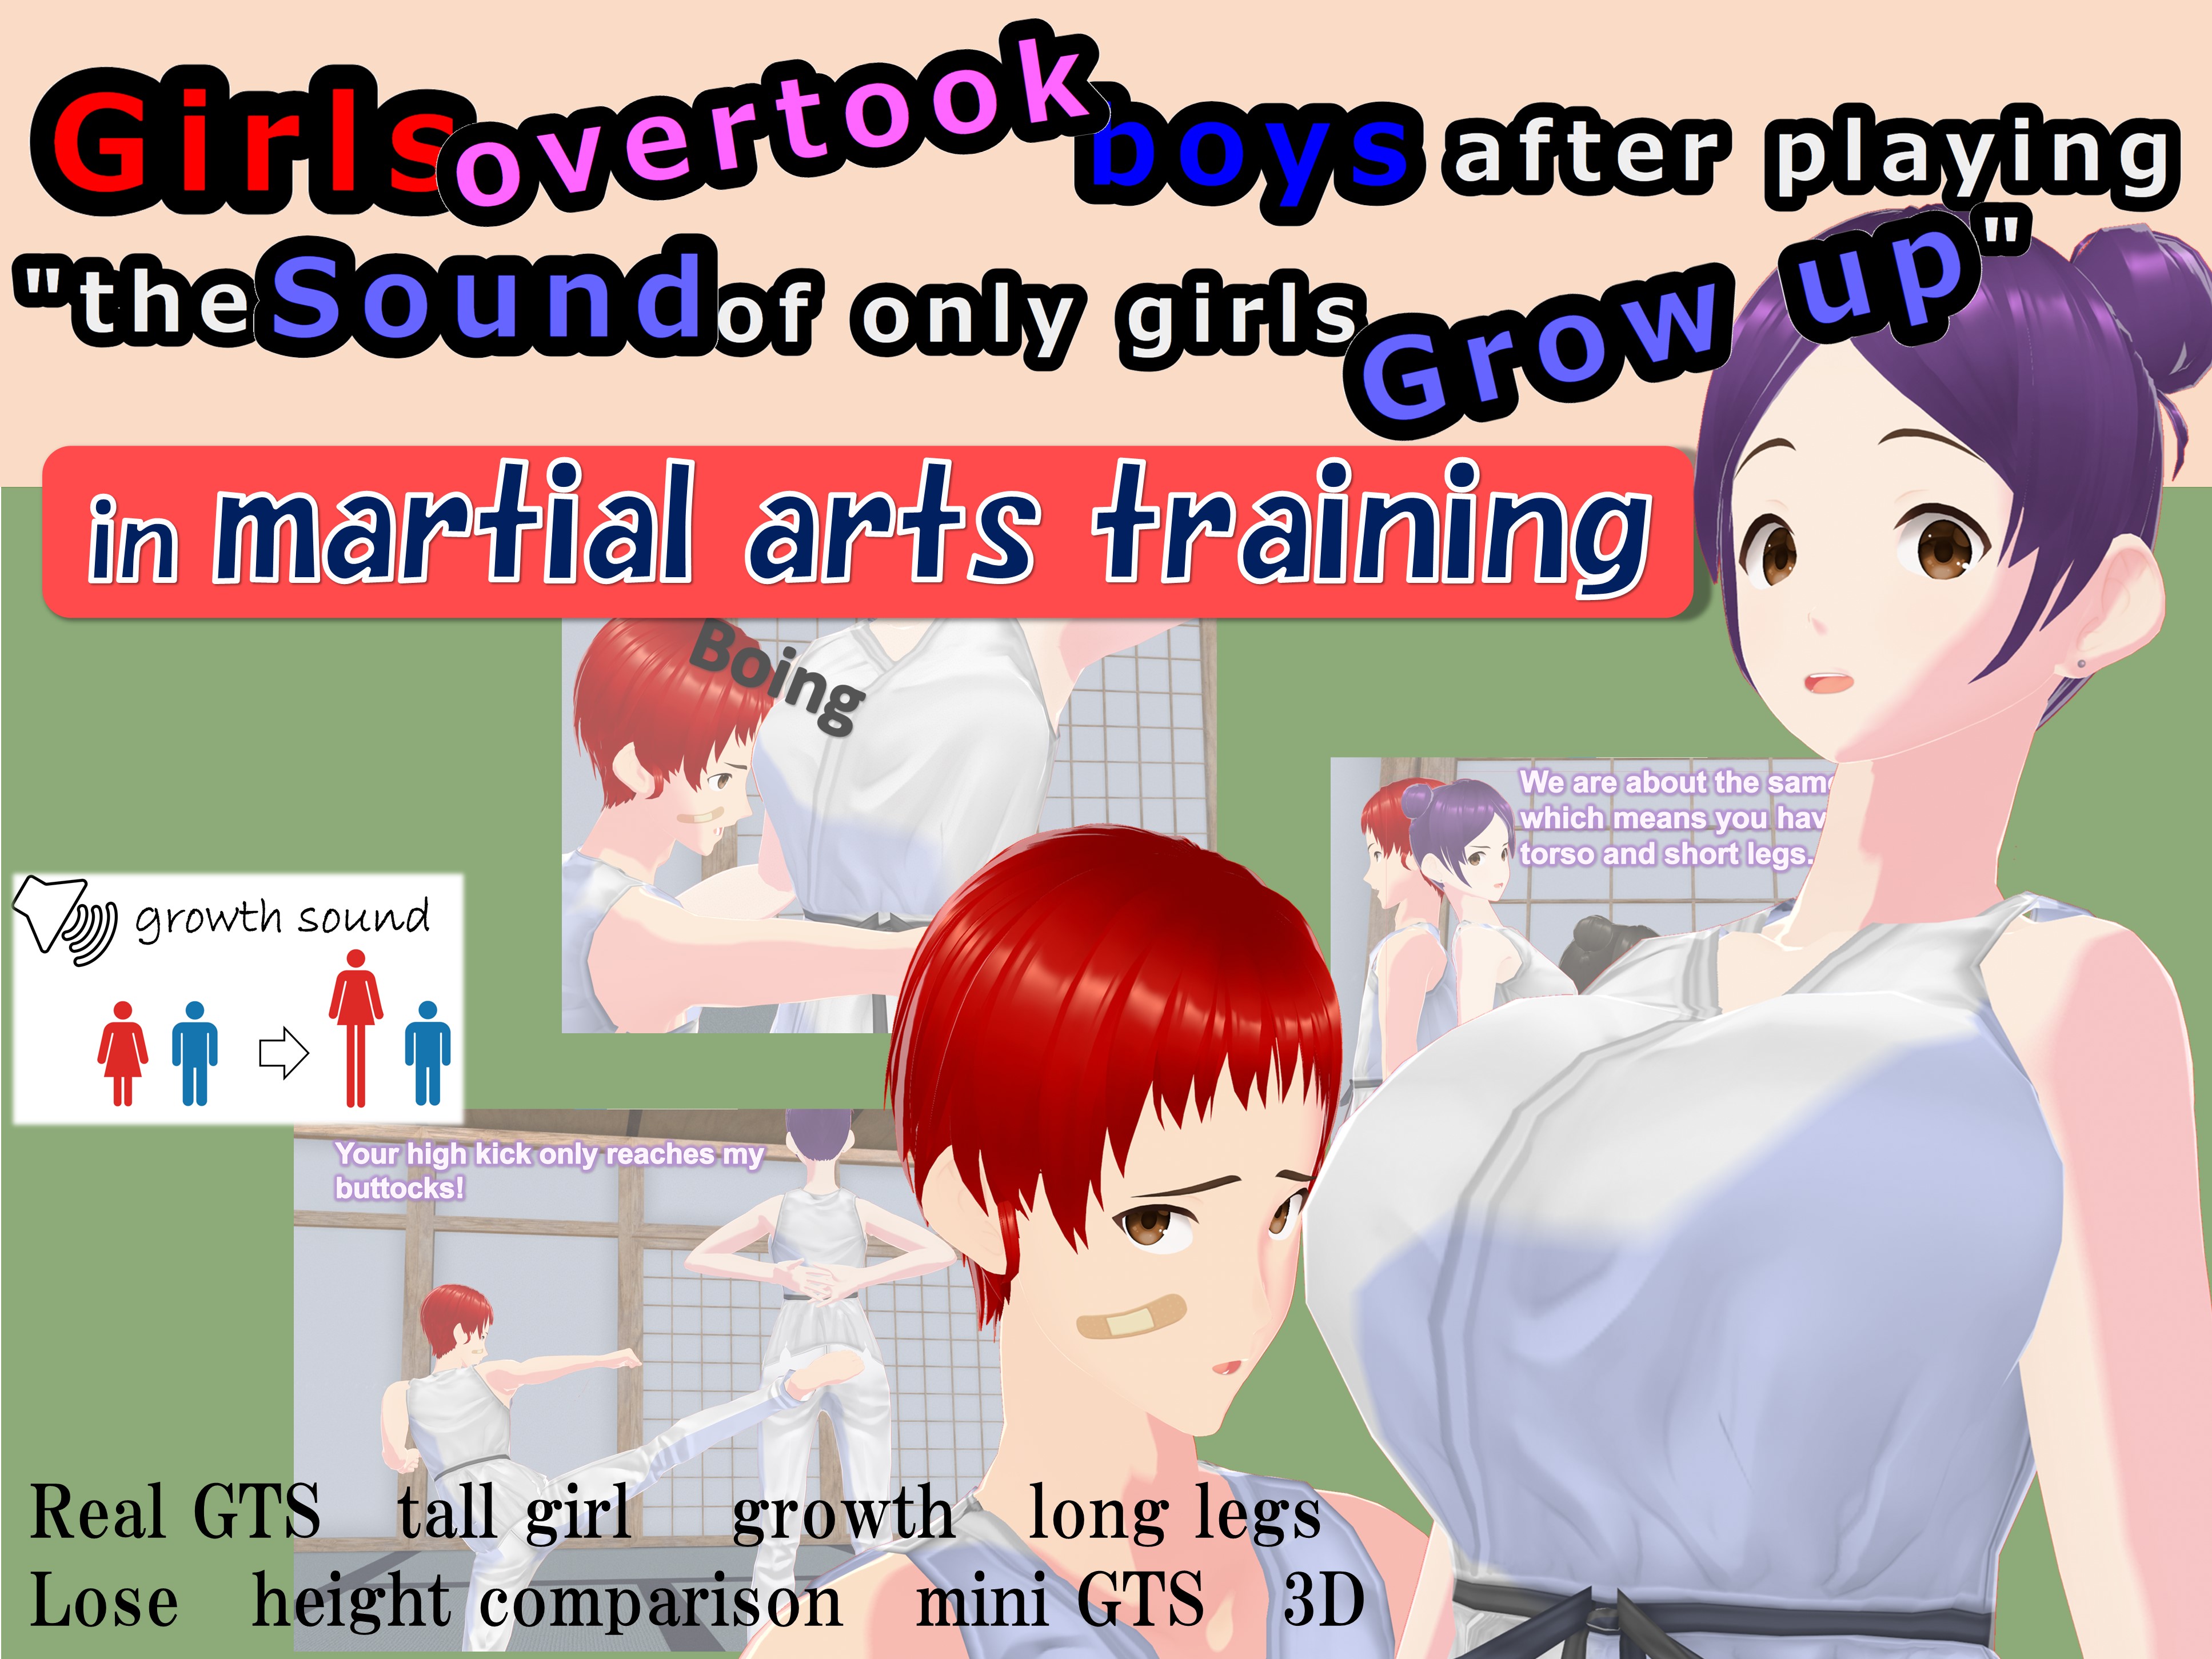 Girls overtook boys after playing the sound of only girls grow up in martial arts training